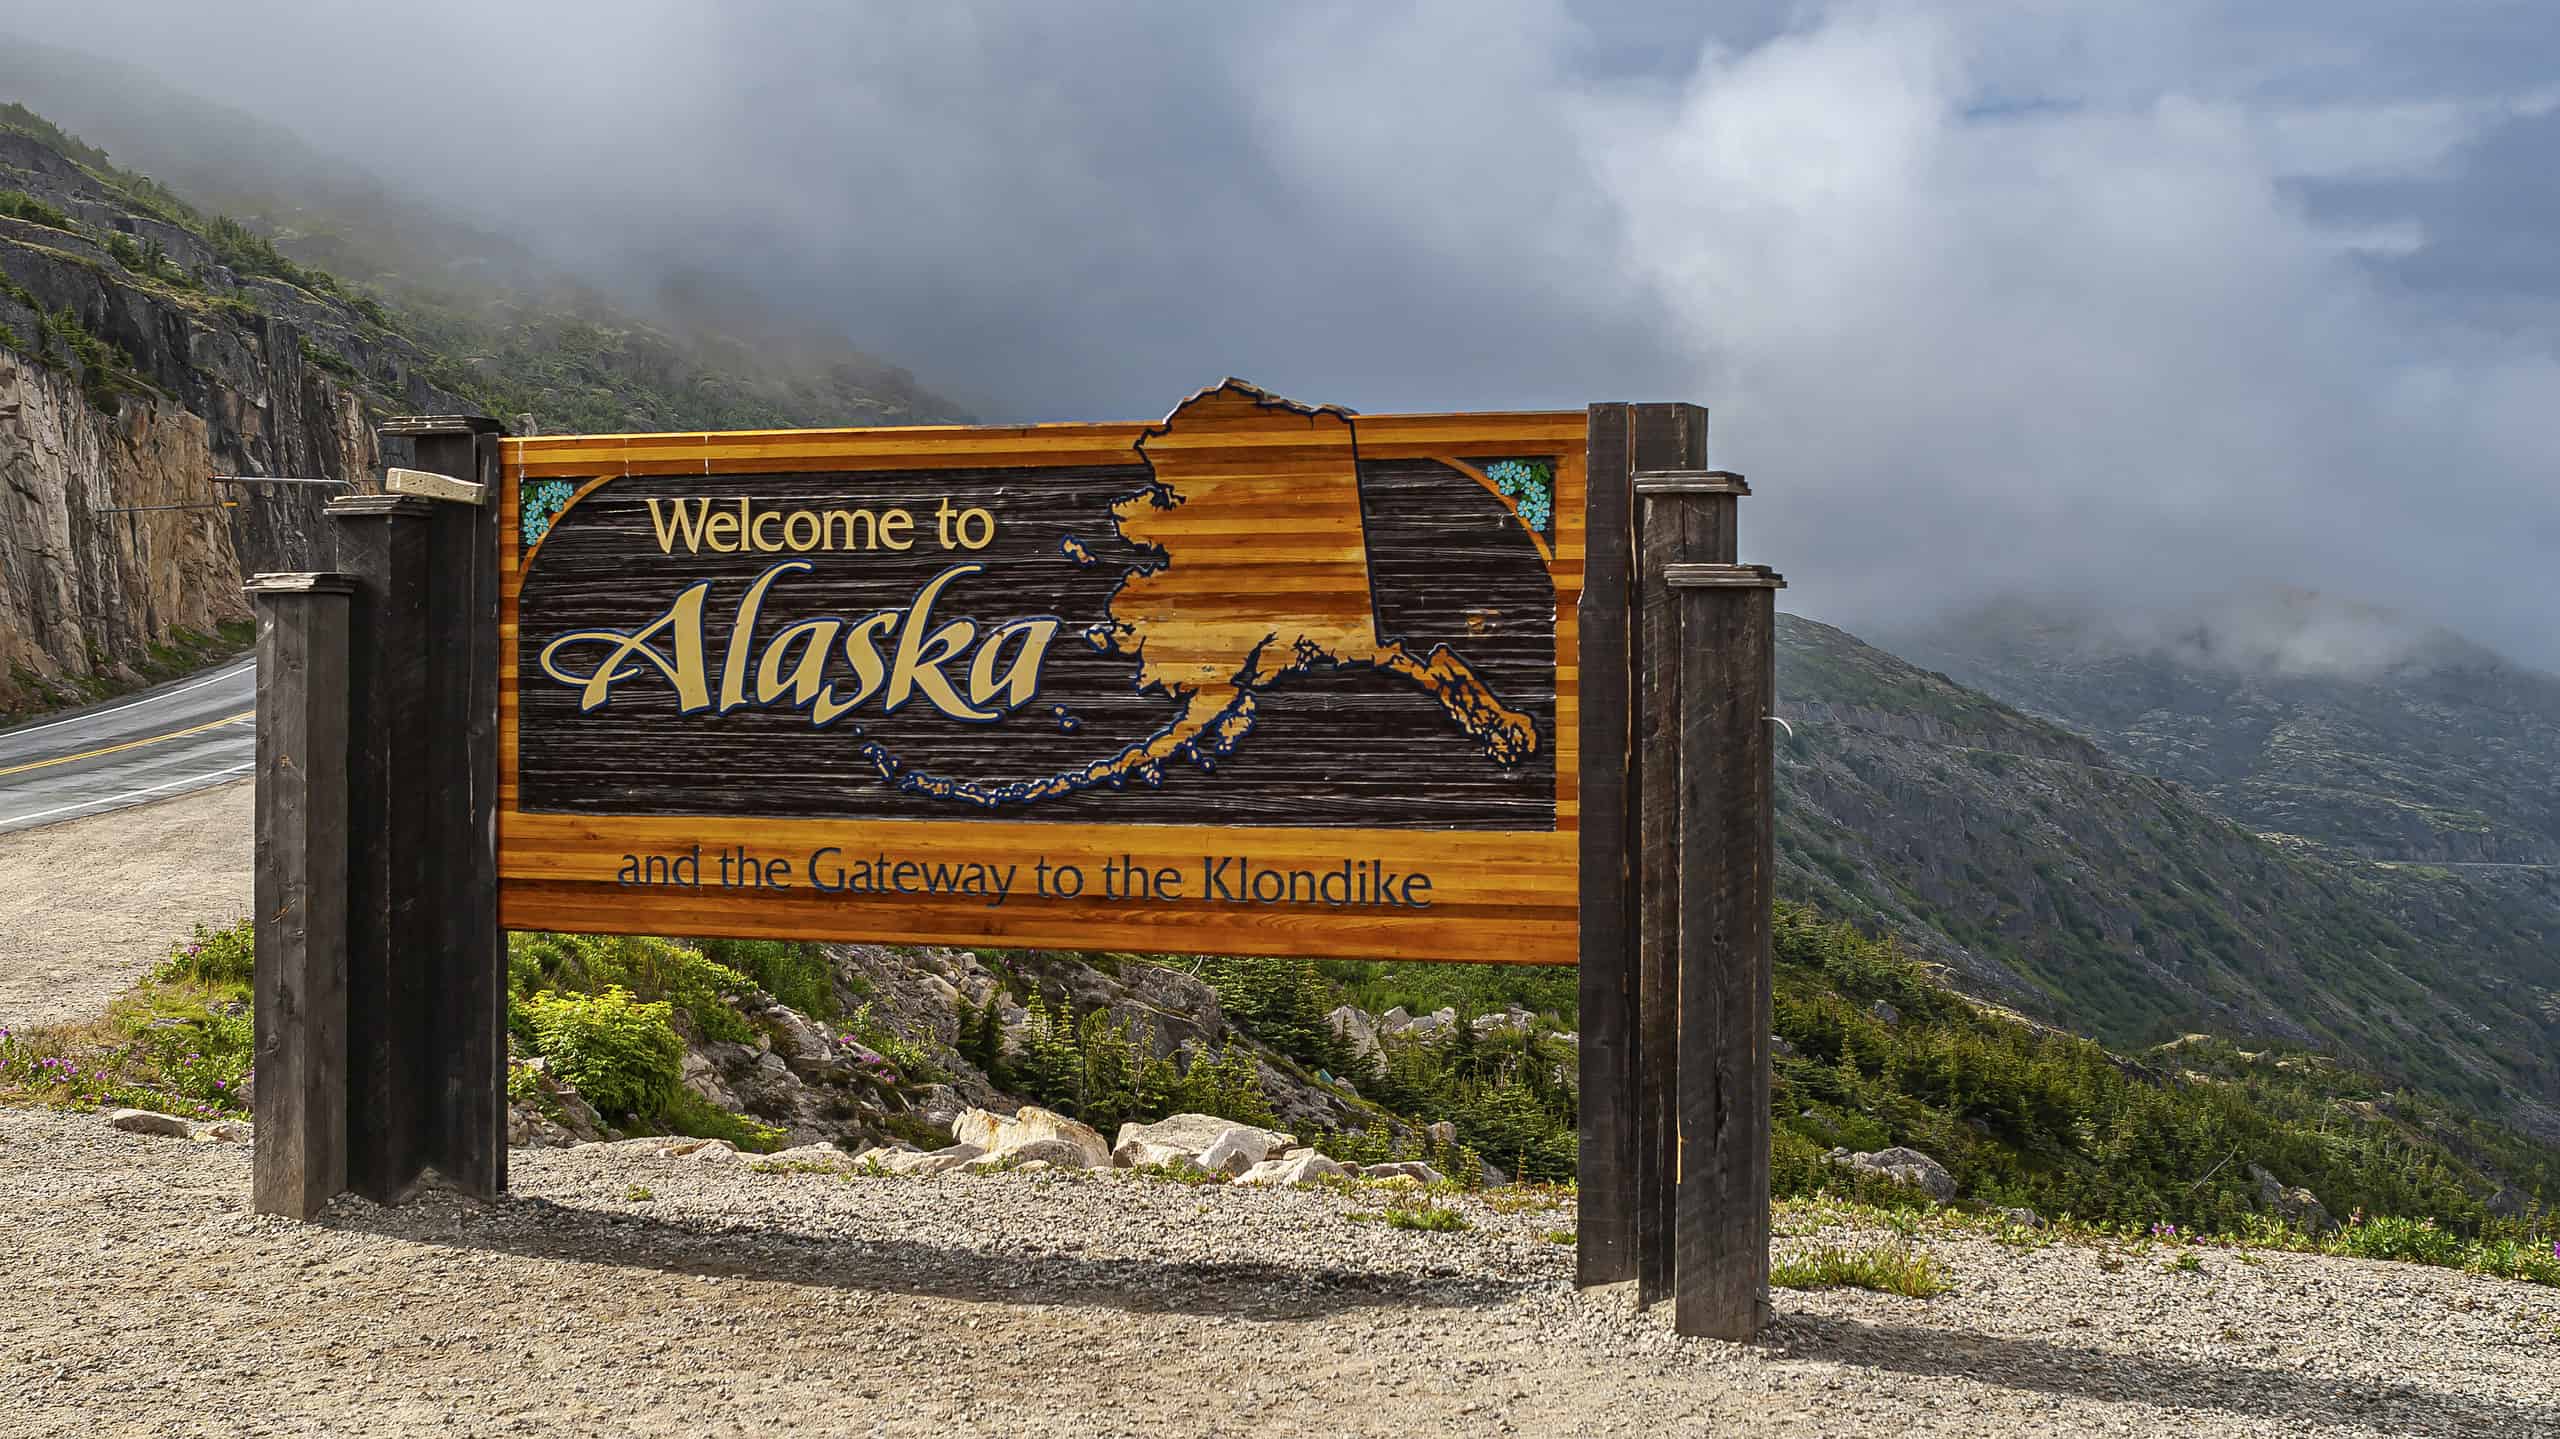 Skagway, Alaska, USA - July 20, 2011: Klondike highway to Canada. Colorful Welcome sign near the border. Cloudscape in back.